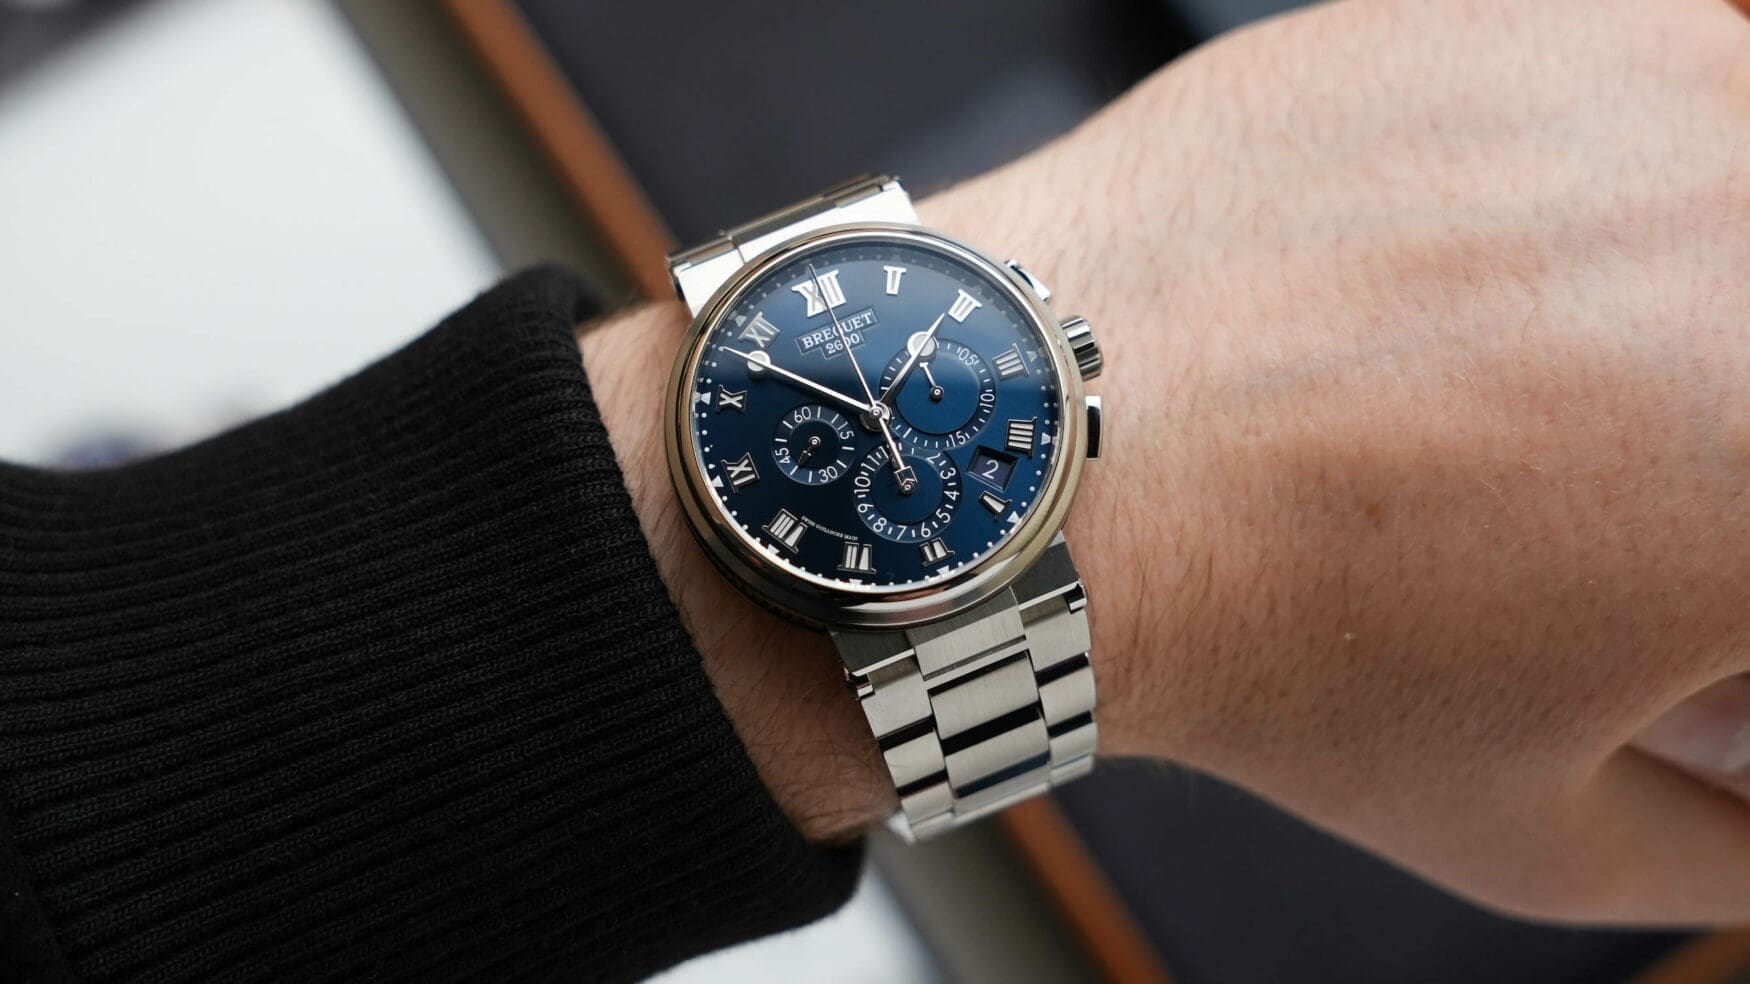 This sporty Breguet Marine Chronographe 5527 is unburdened by dive watch aesthetics